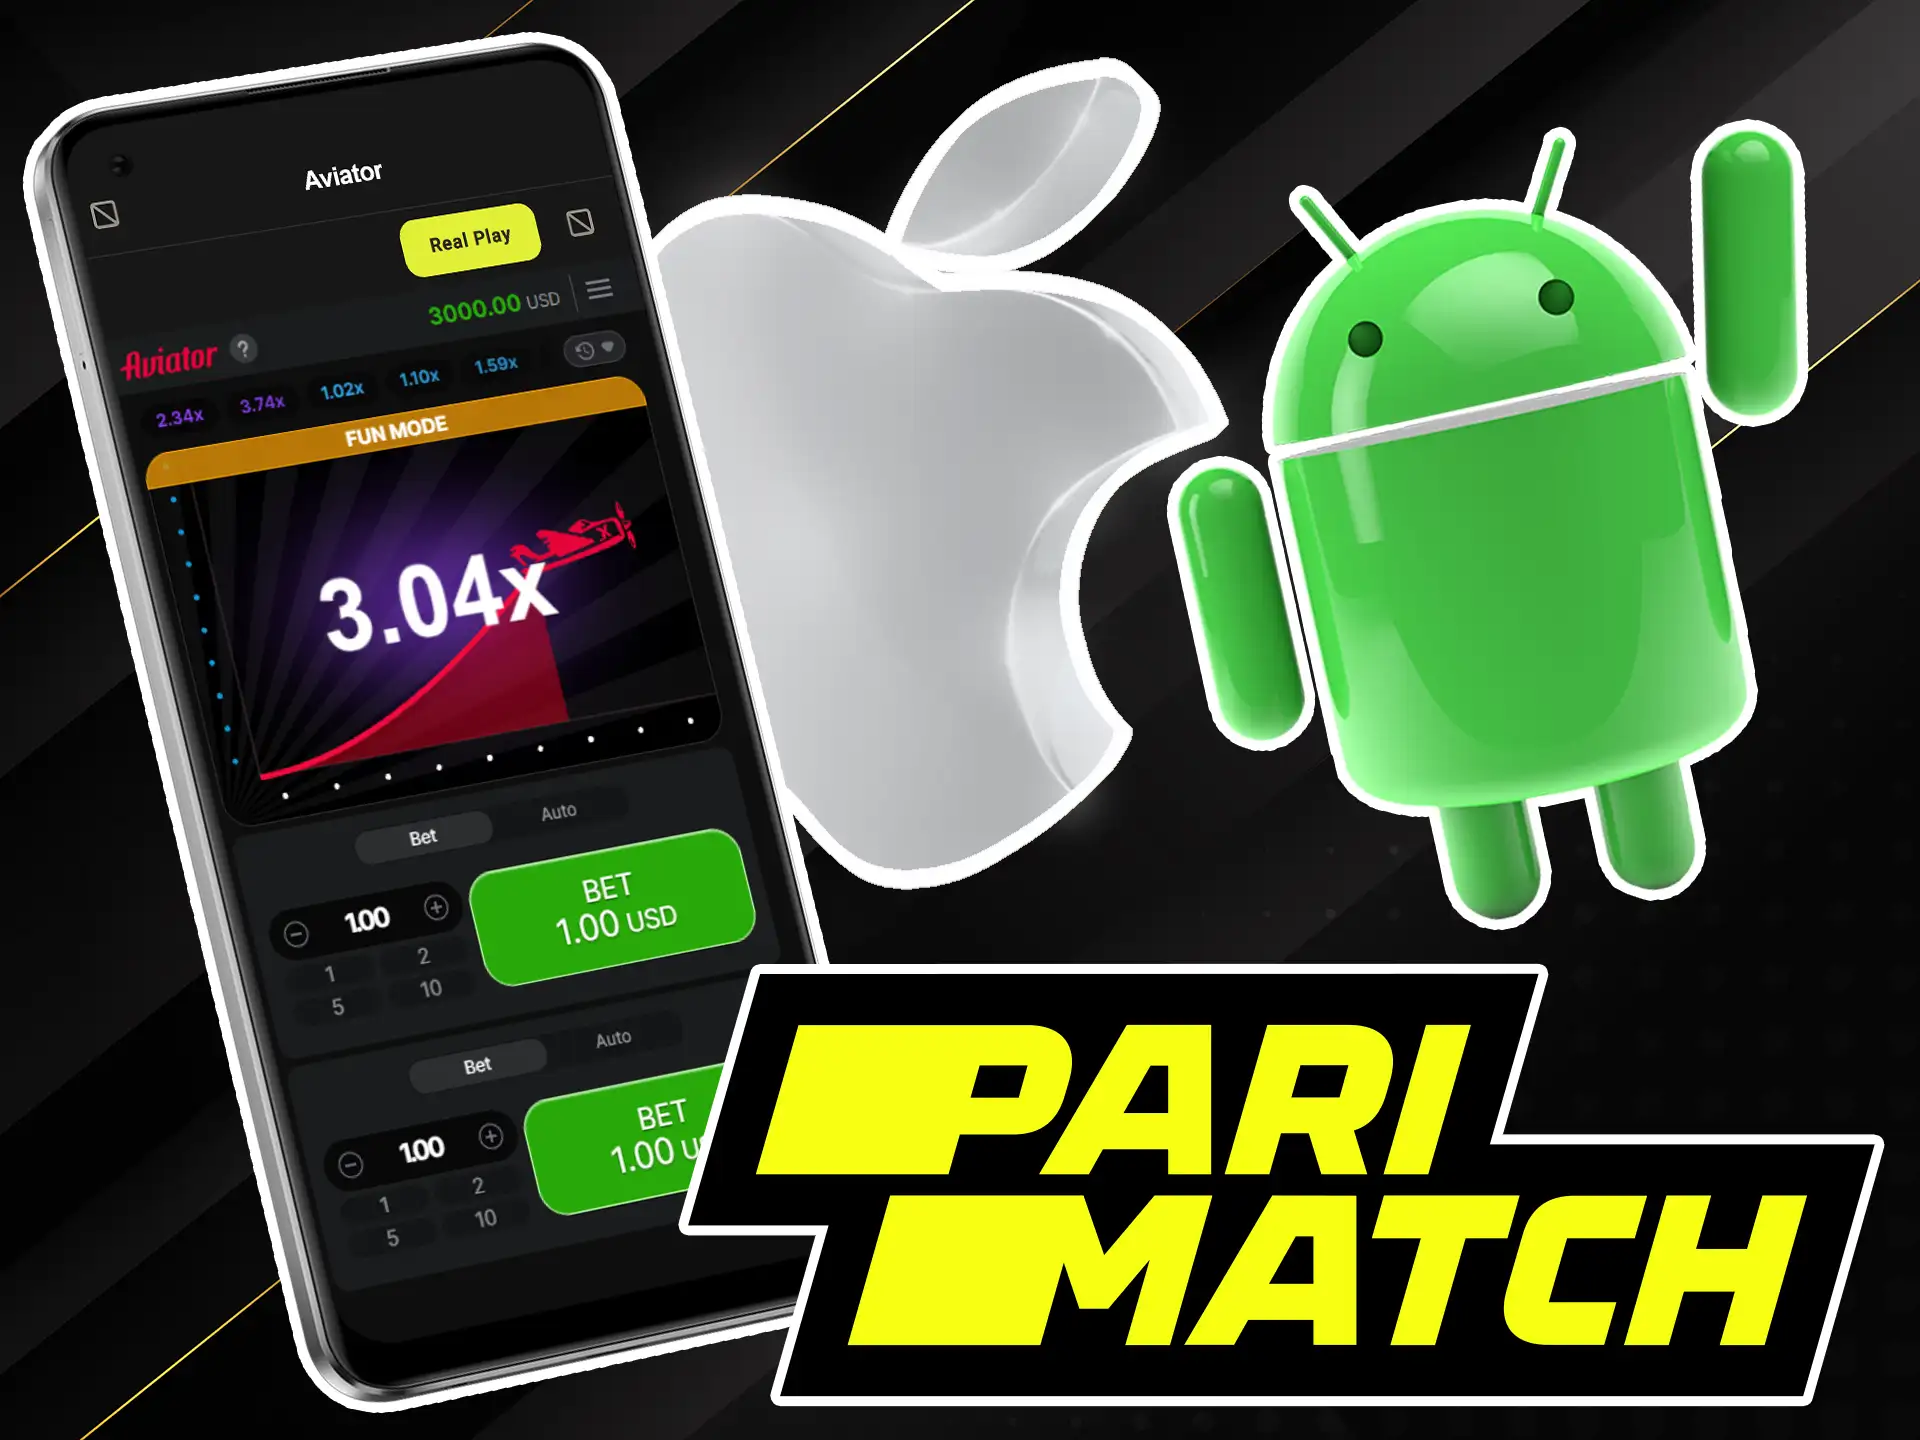 Play on your mobile device with the Parimatch app, available for both Android and iOS.